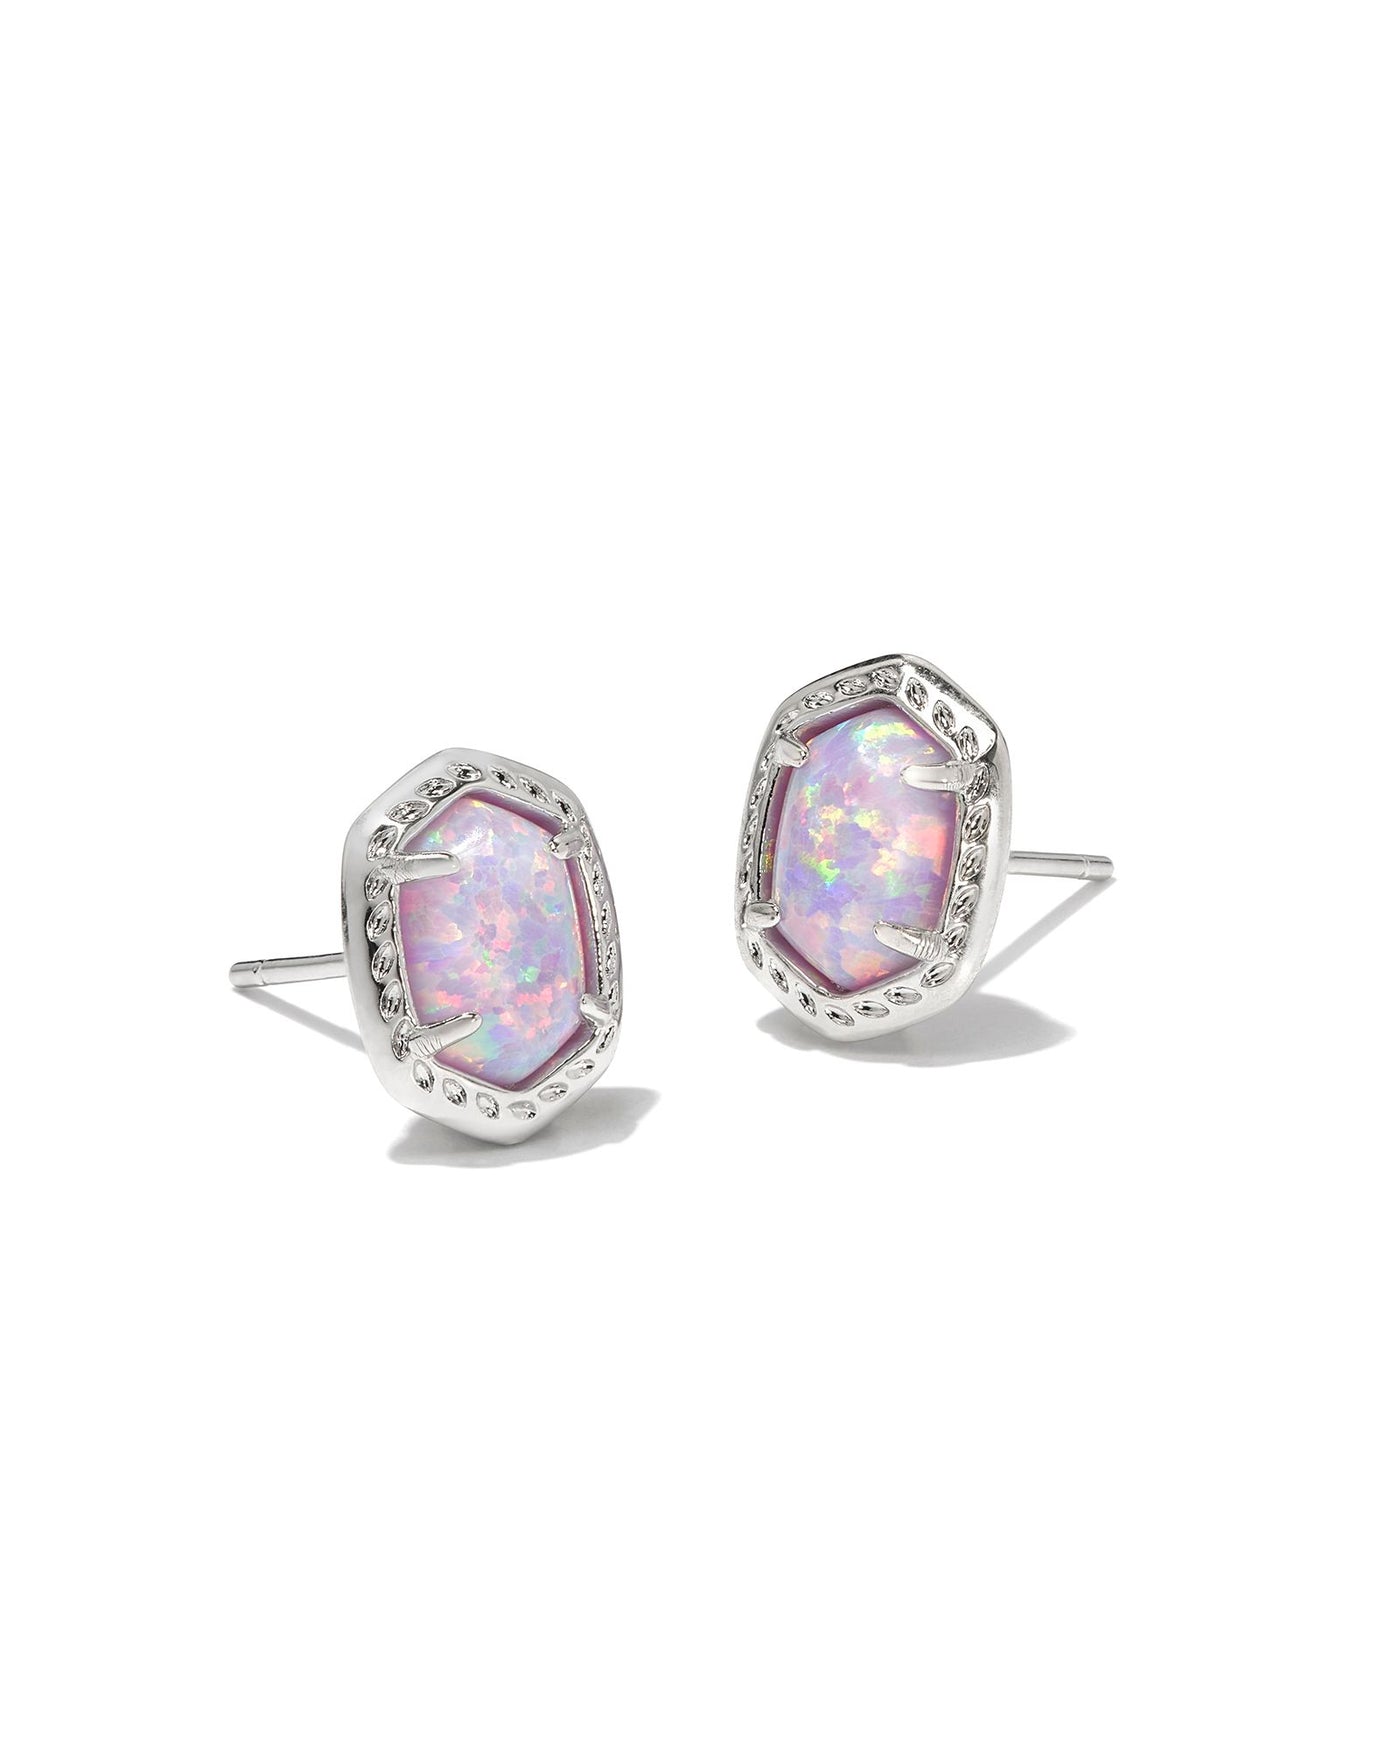 Kendra Scott Daphne Framed Studs in Silver Lilac Kyocera Opal front view.